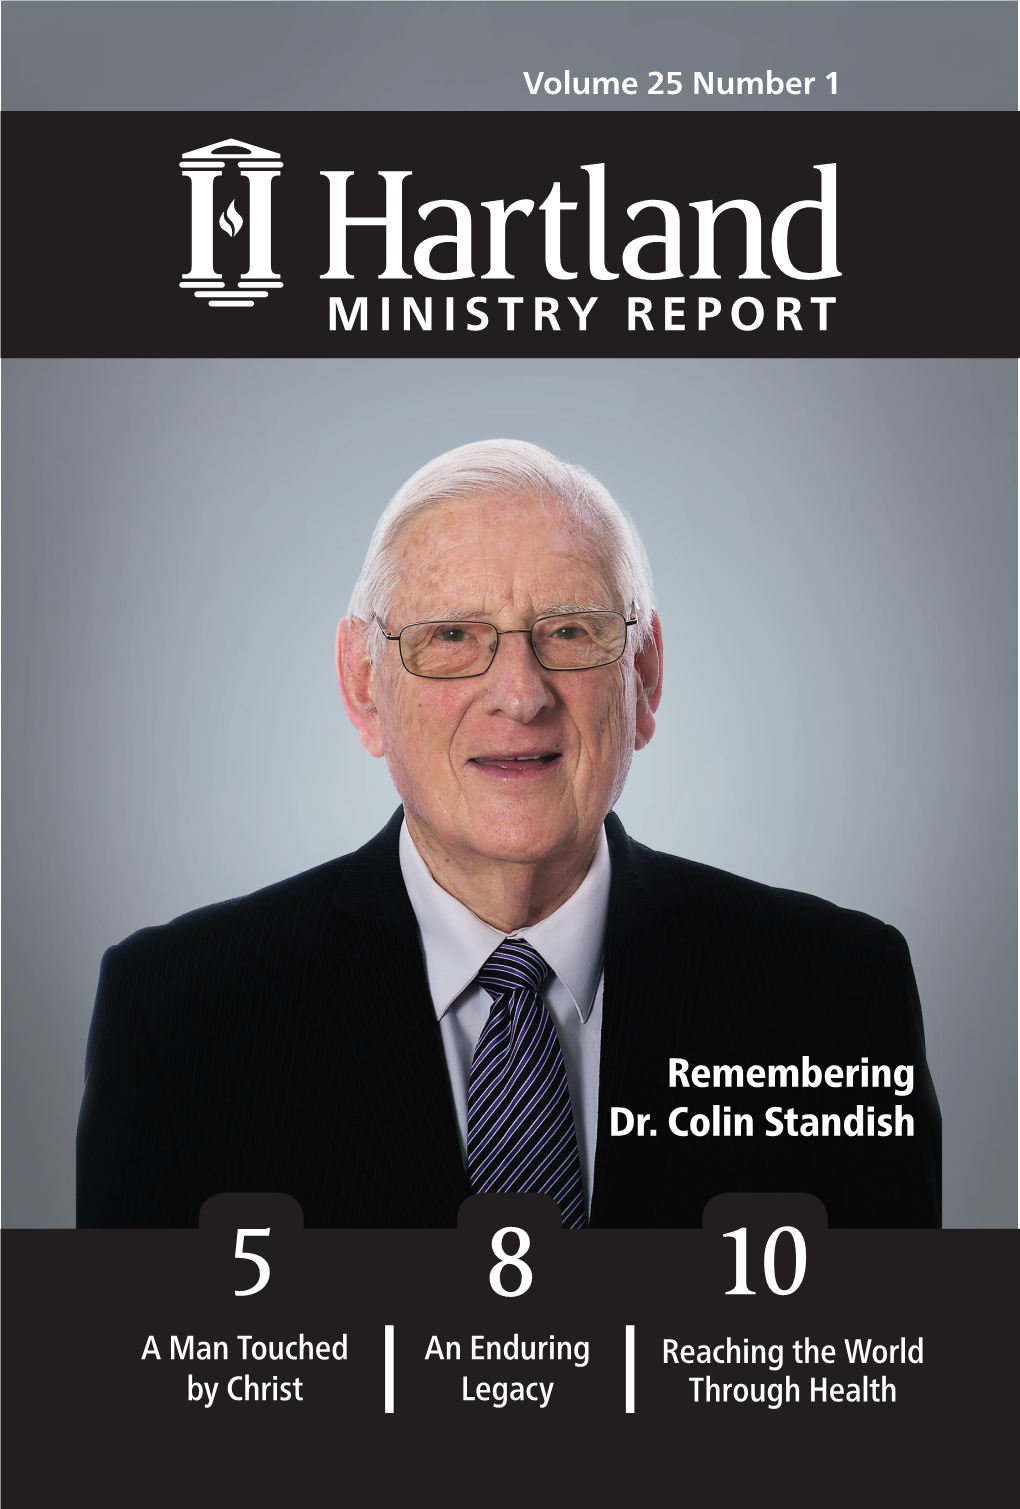 Remembering Dr. Colin Standish 5 8 10 a Man Touched an Enduring Reaching the World by Christ Legacy Through Health Dr